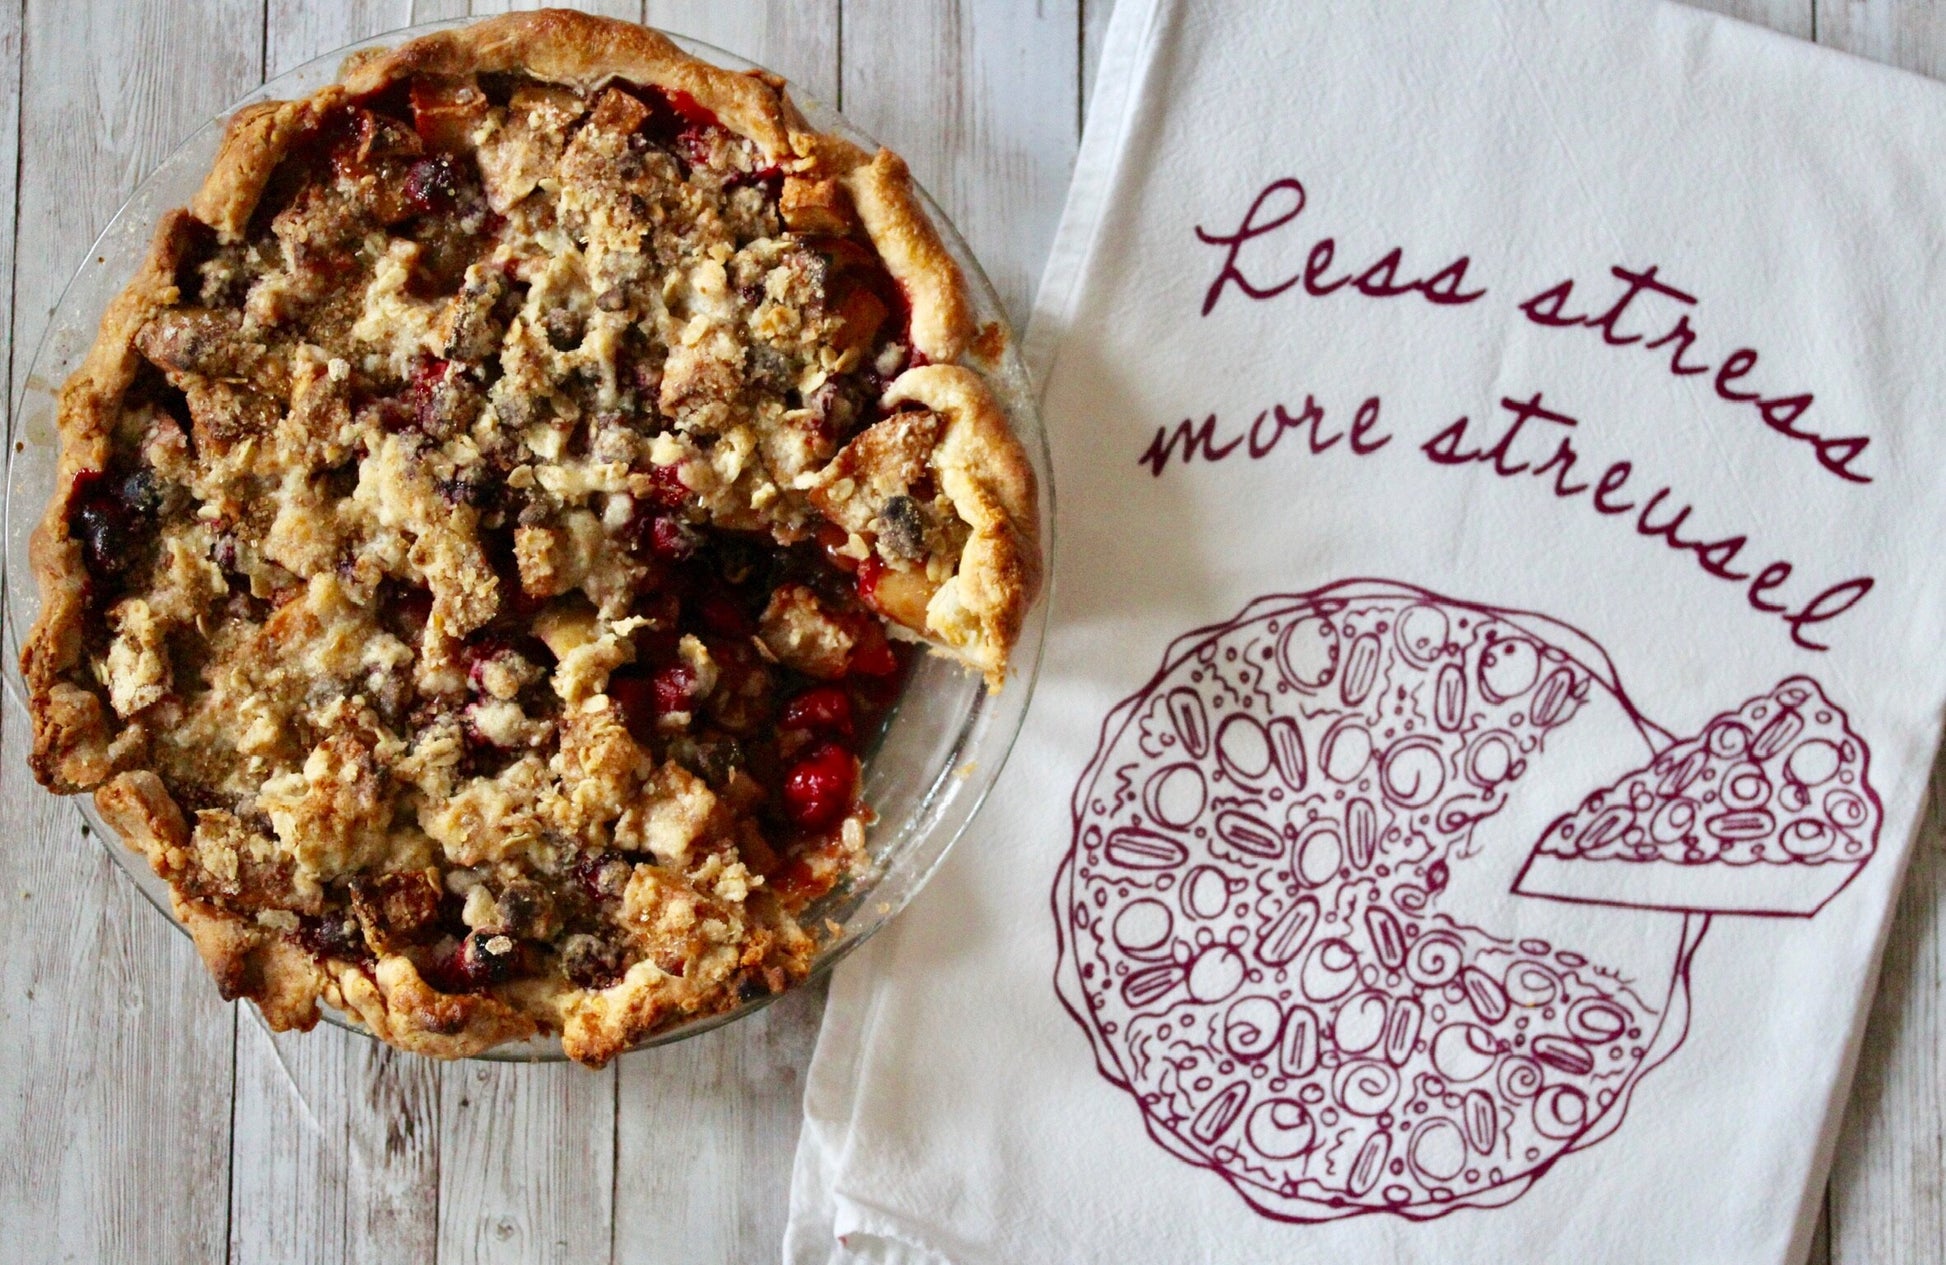 A white tea towel with the words "Less stress, more streusel" and a pie illustration in dark red next to a cranberry peach pie with streusel topping